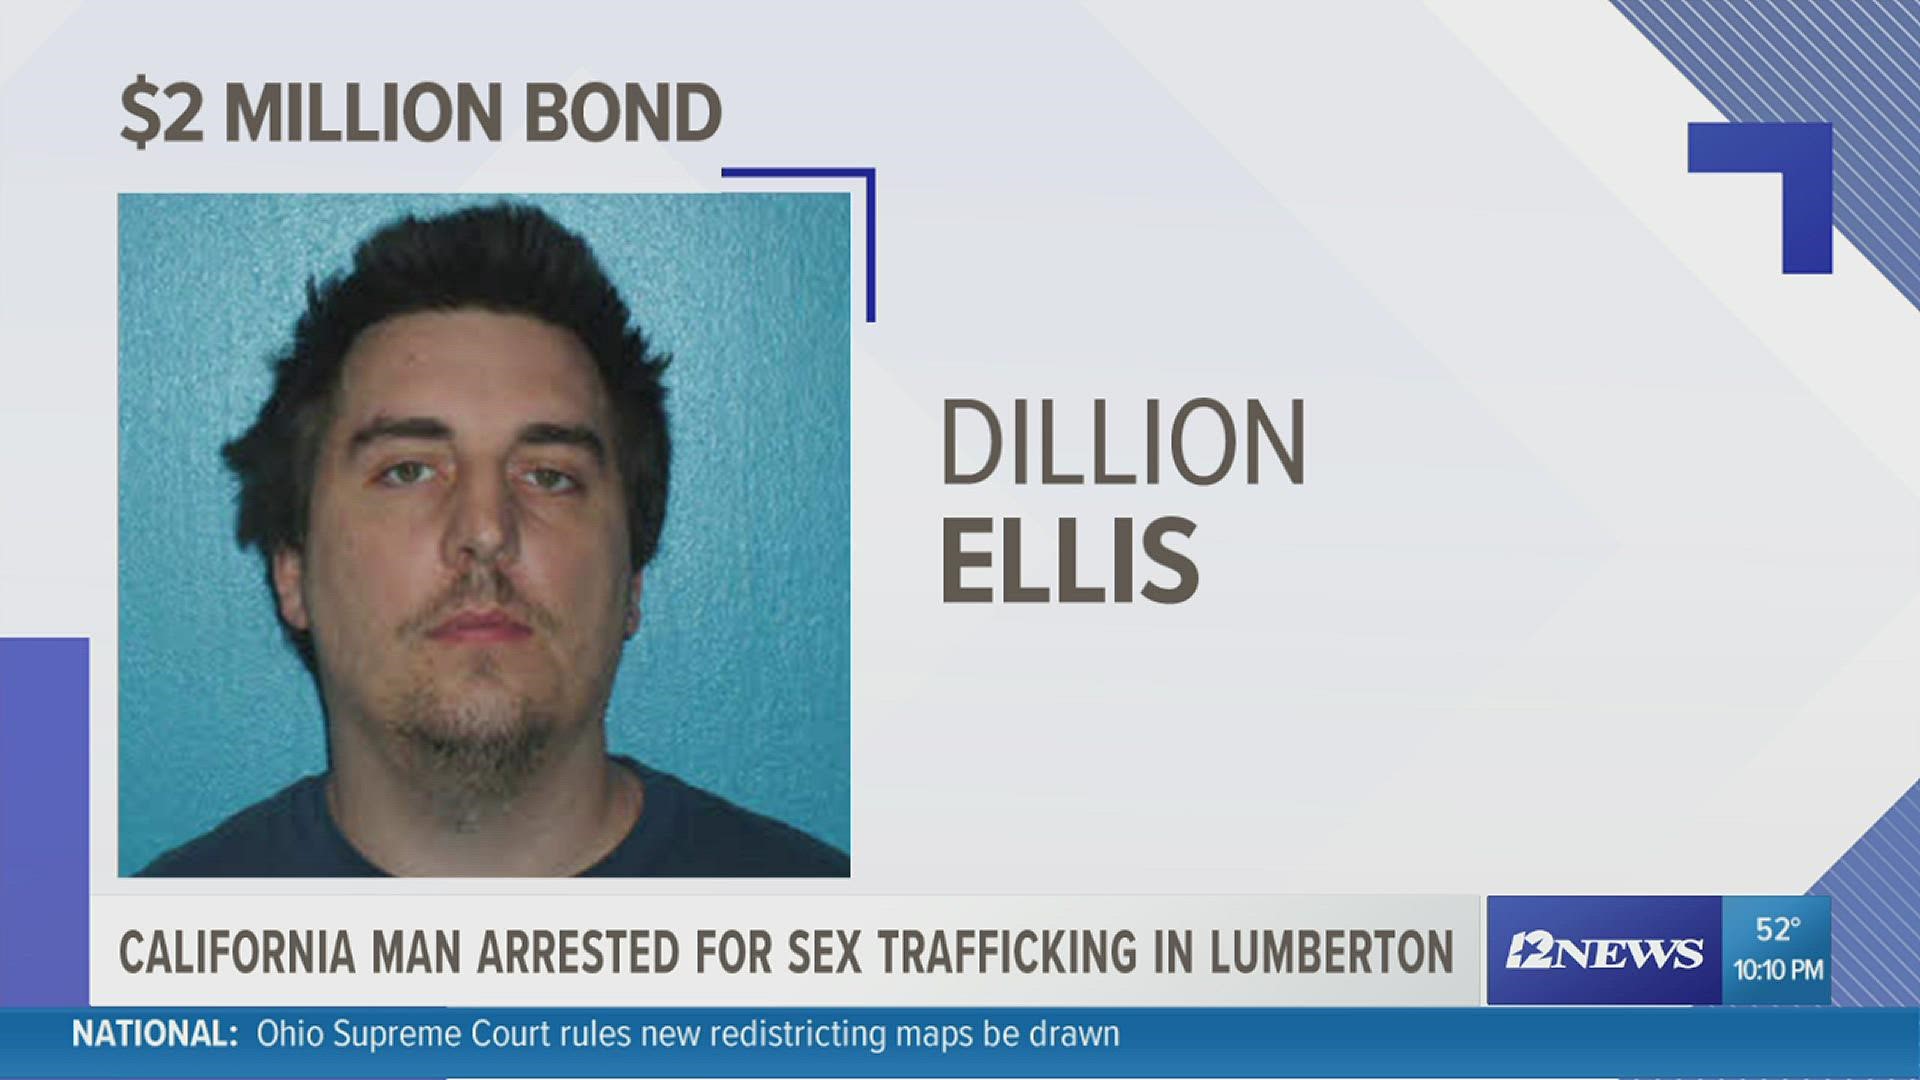 Dillion Ellis initally told police he thought the girl was 19-years old.